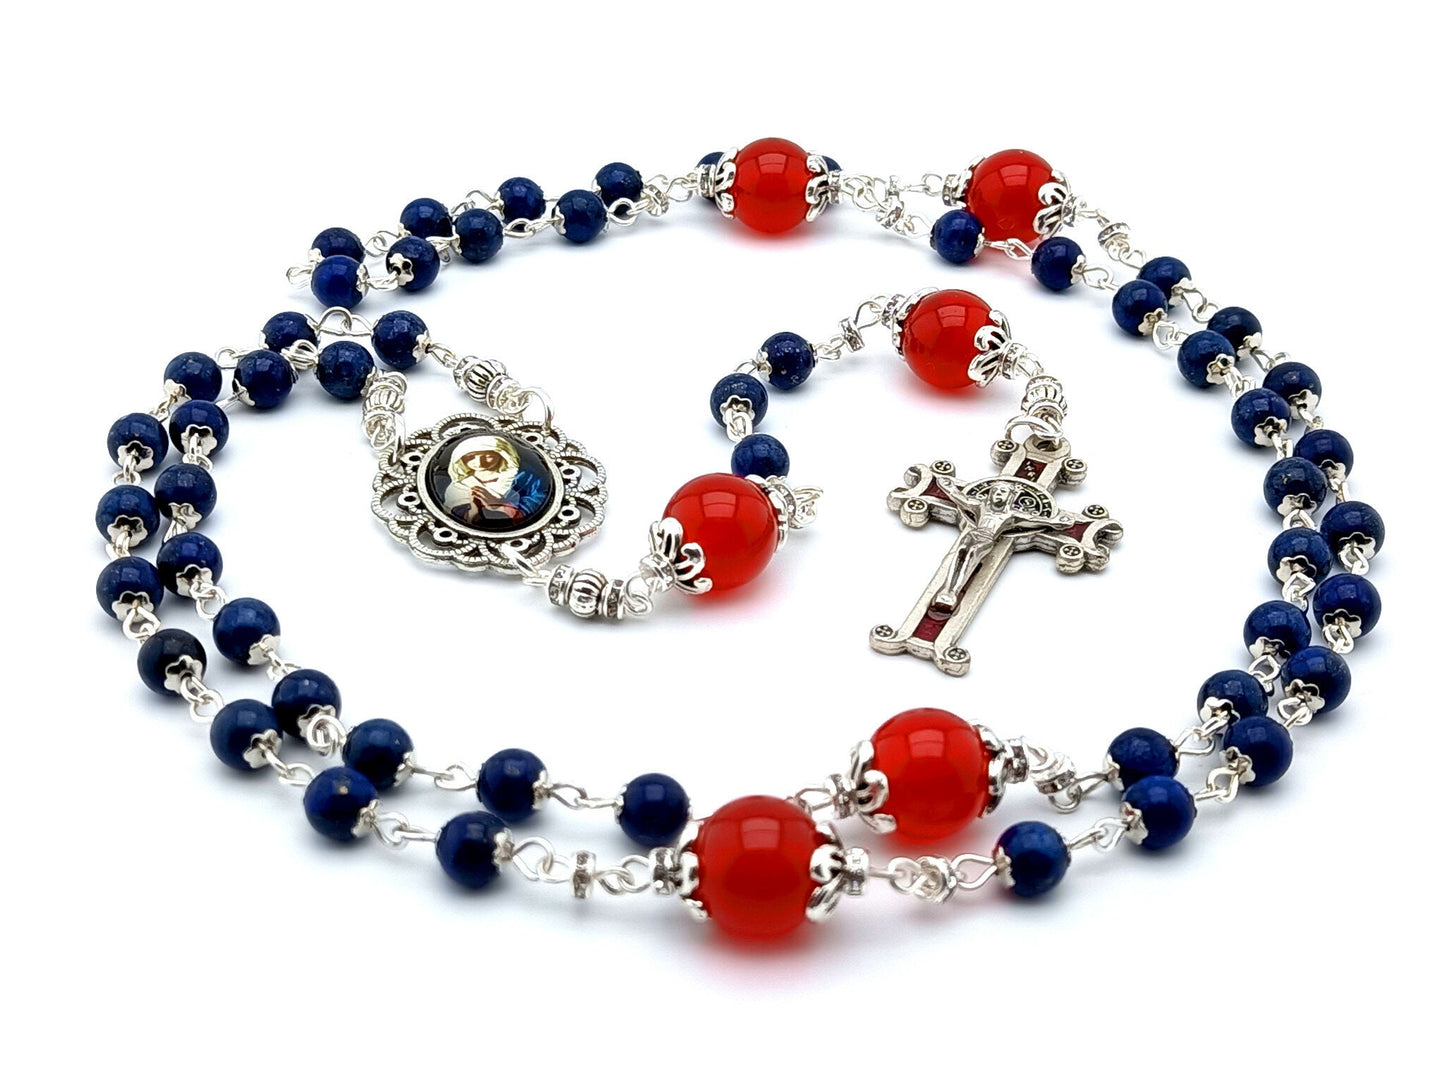 Blessed Virgin Mary unique rosary beads with lapis lazuli and red glass bleads, silver and red enamel Saint Benedict crucifix and picture centre medal.